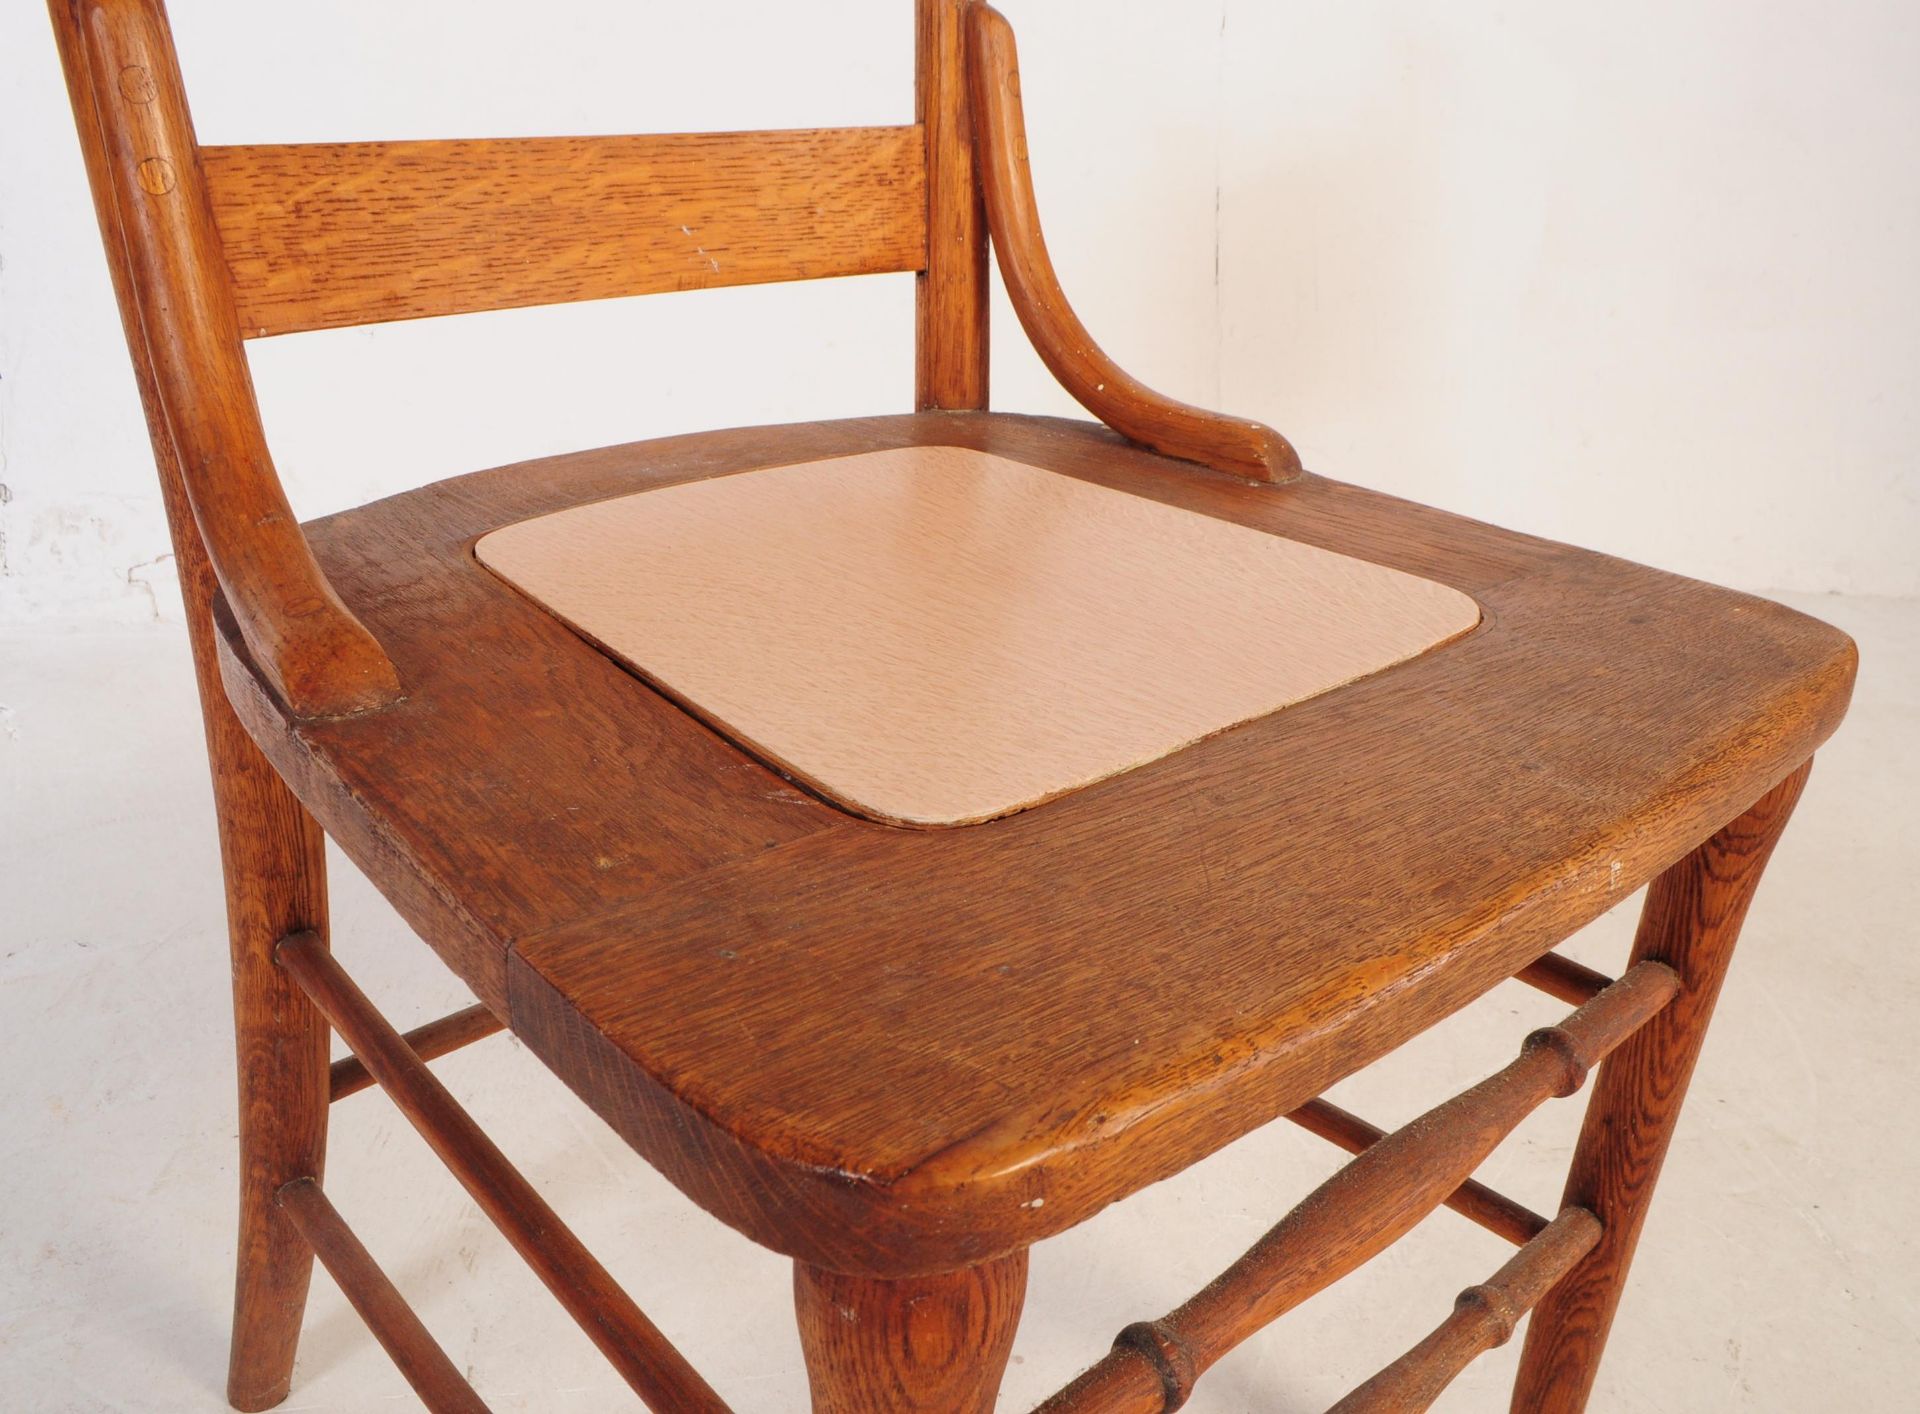 EARLY 20TH CENTURY ARTS & CRAFTS OAK HALL ARMCHAIR - Image 8 of 16